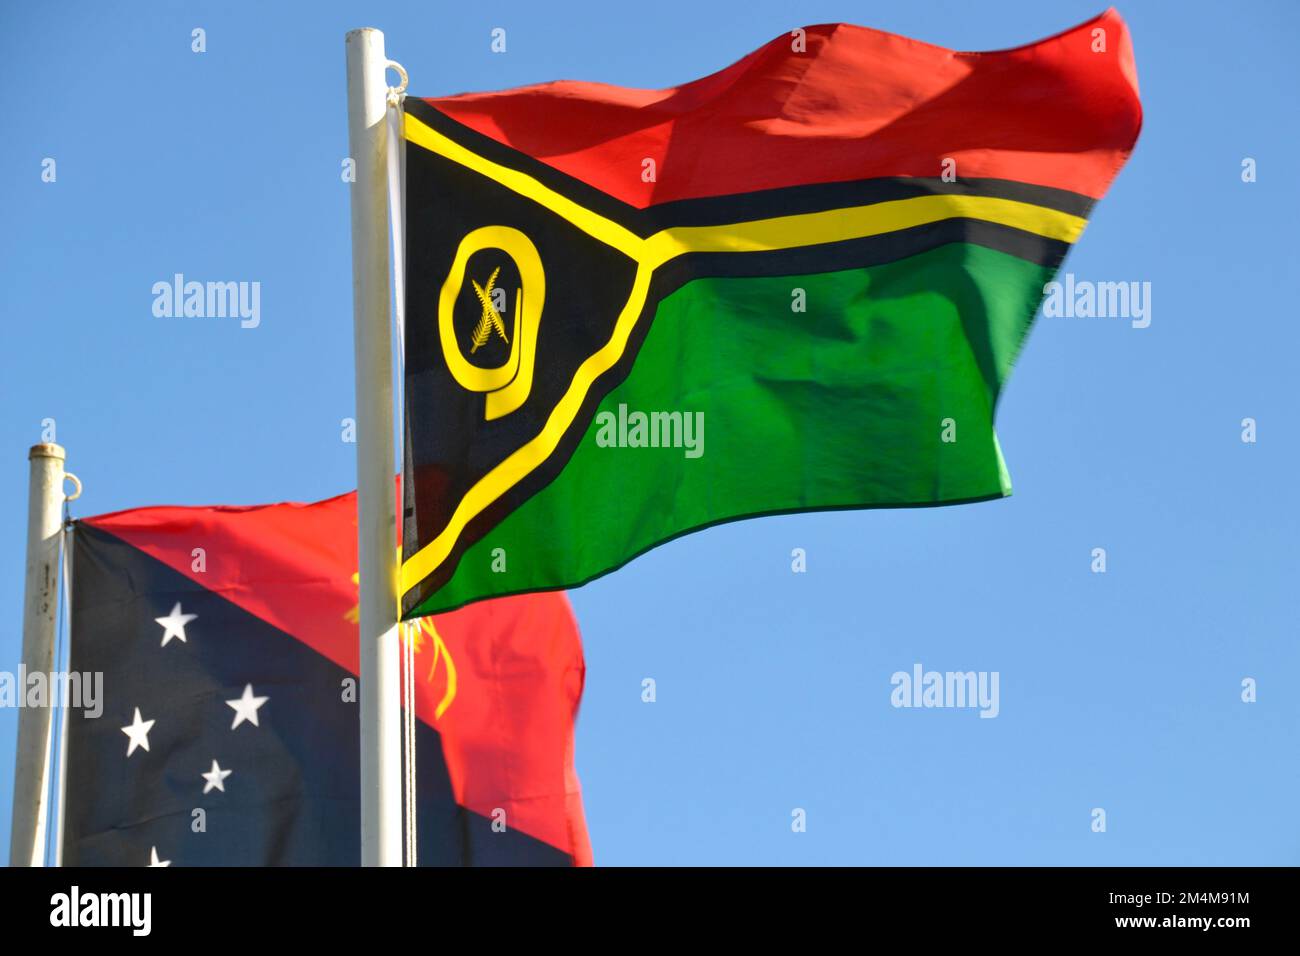 Flags of neighbor islands Vanuatu and Papua New Guinea  in the  Melanesian region of the South Pacific flying together show solidarity and partnership Stock Photo